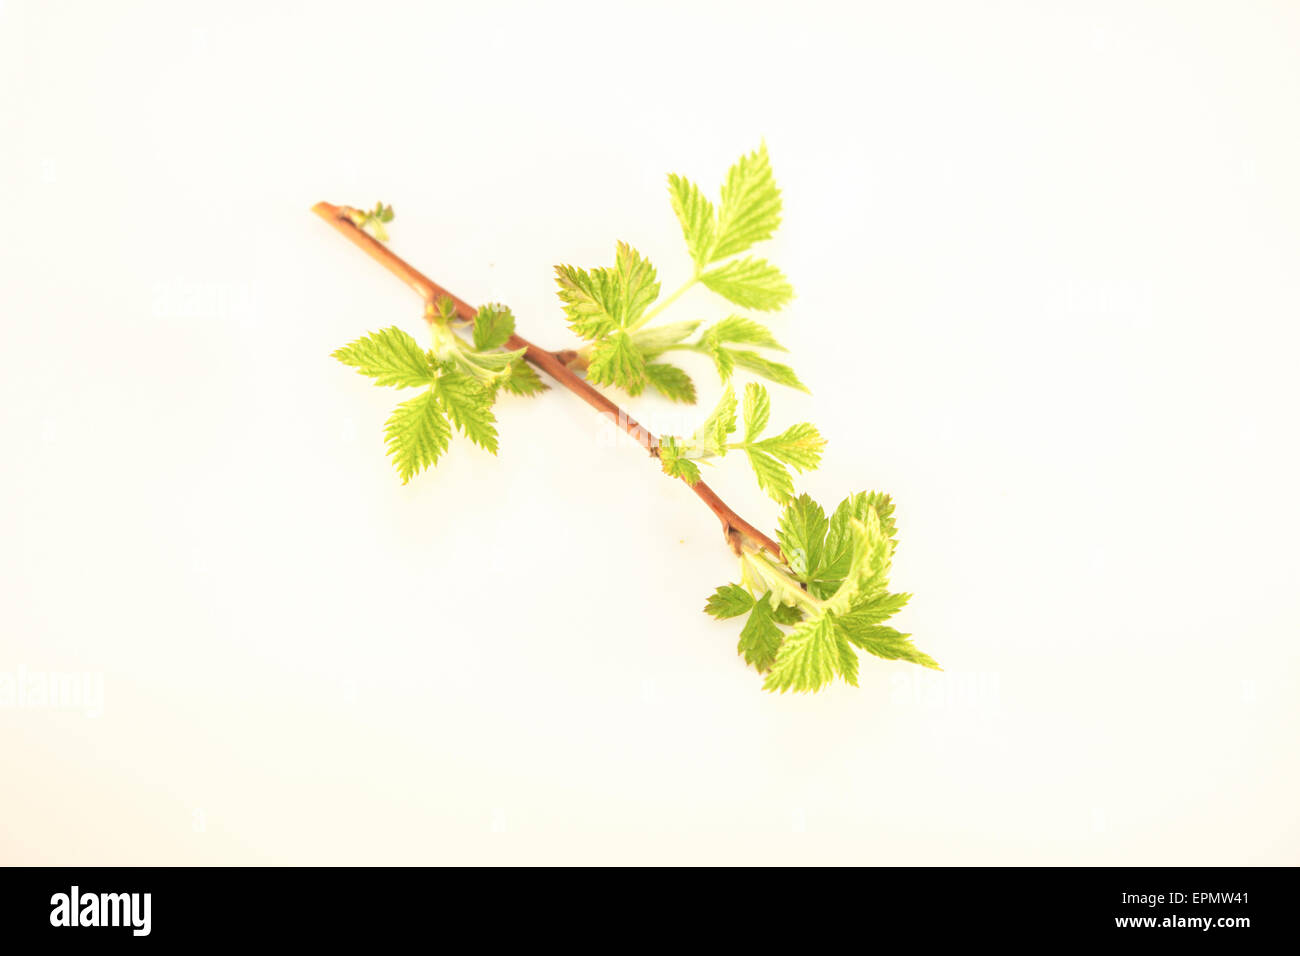 Earley,young, spring rubus blackberry leaves, isolated on white background Stock Photo